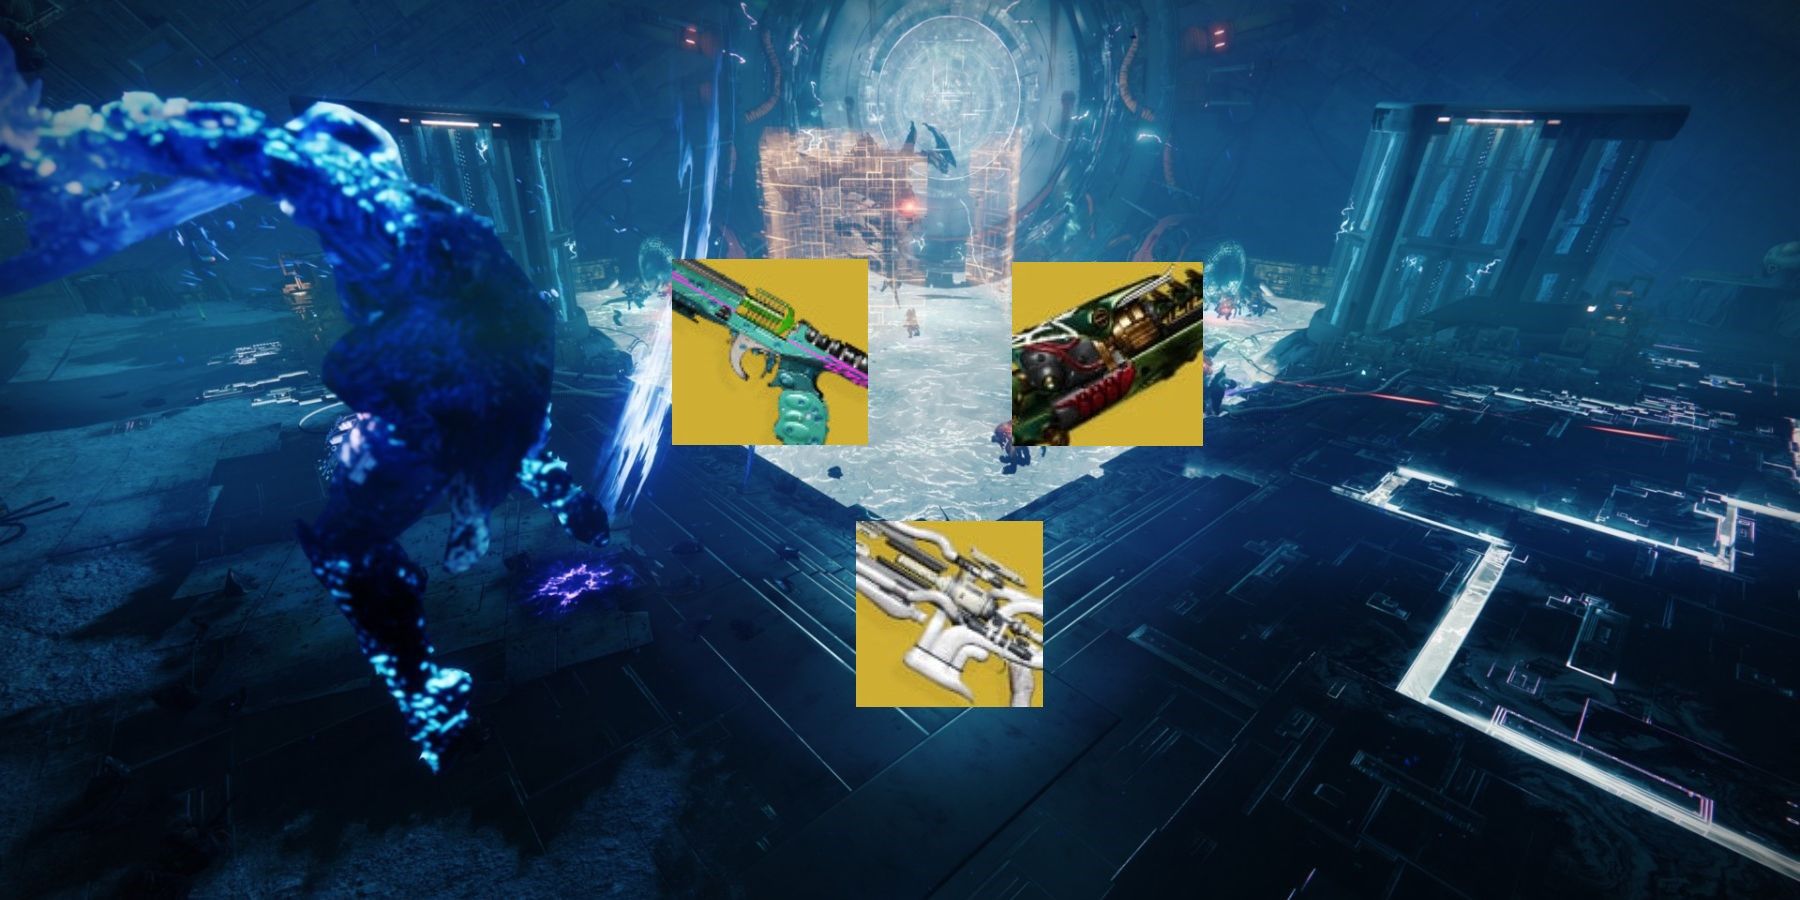 destiny 2 stasis exotic weapons irrelevant current meta community opinion cryosthesia 77k salvation's grip ager's scepter